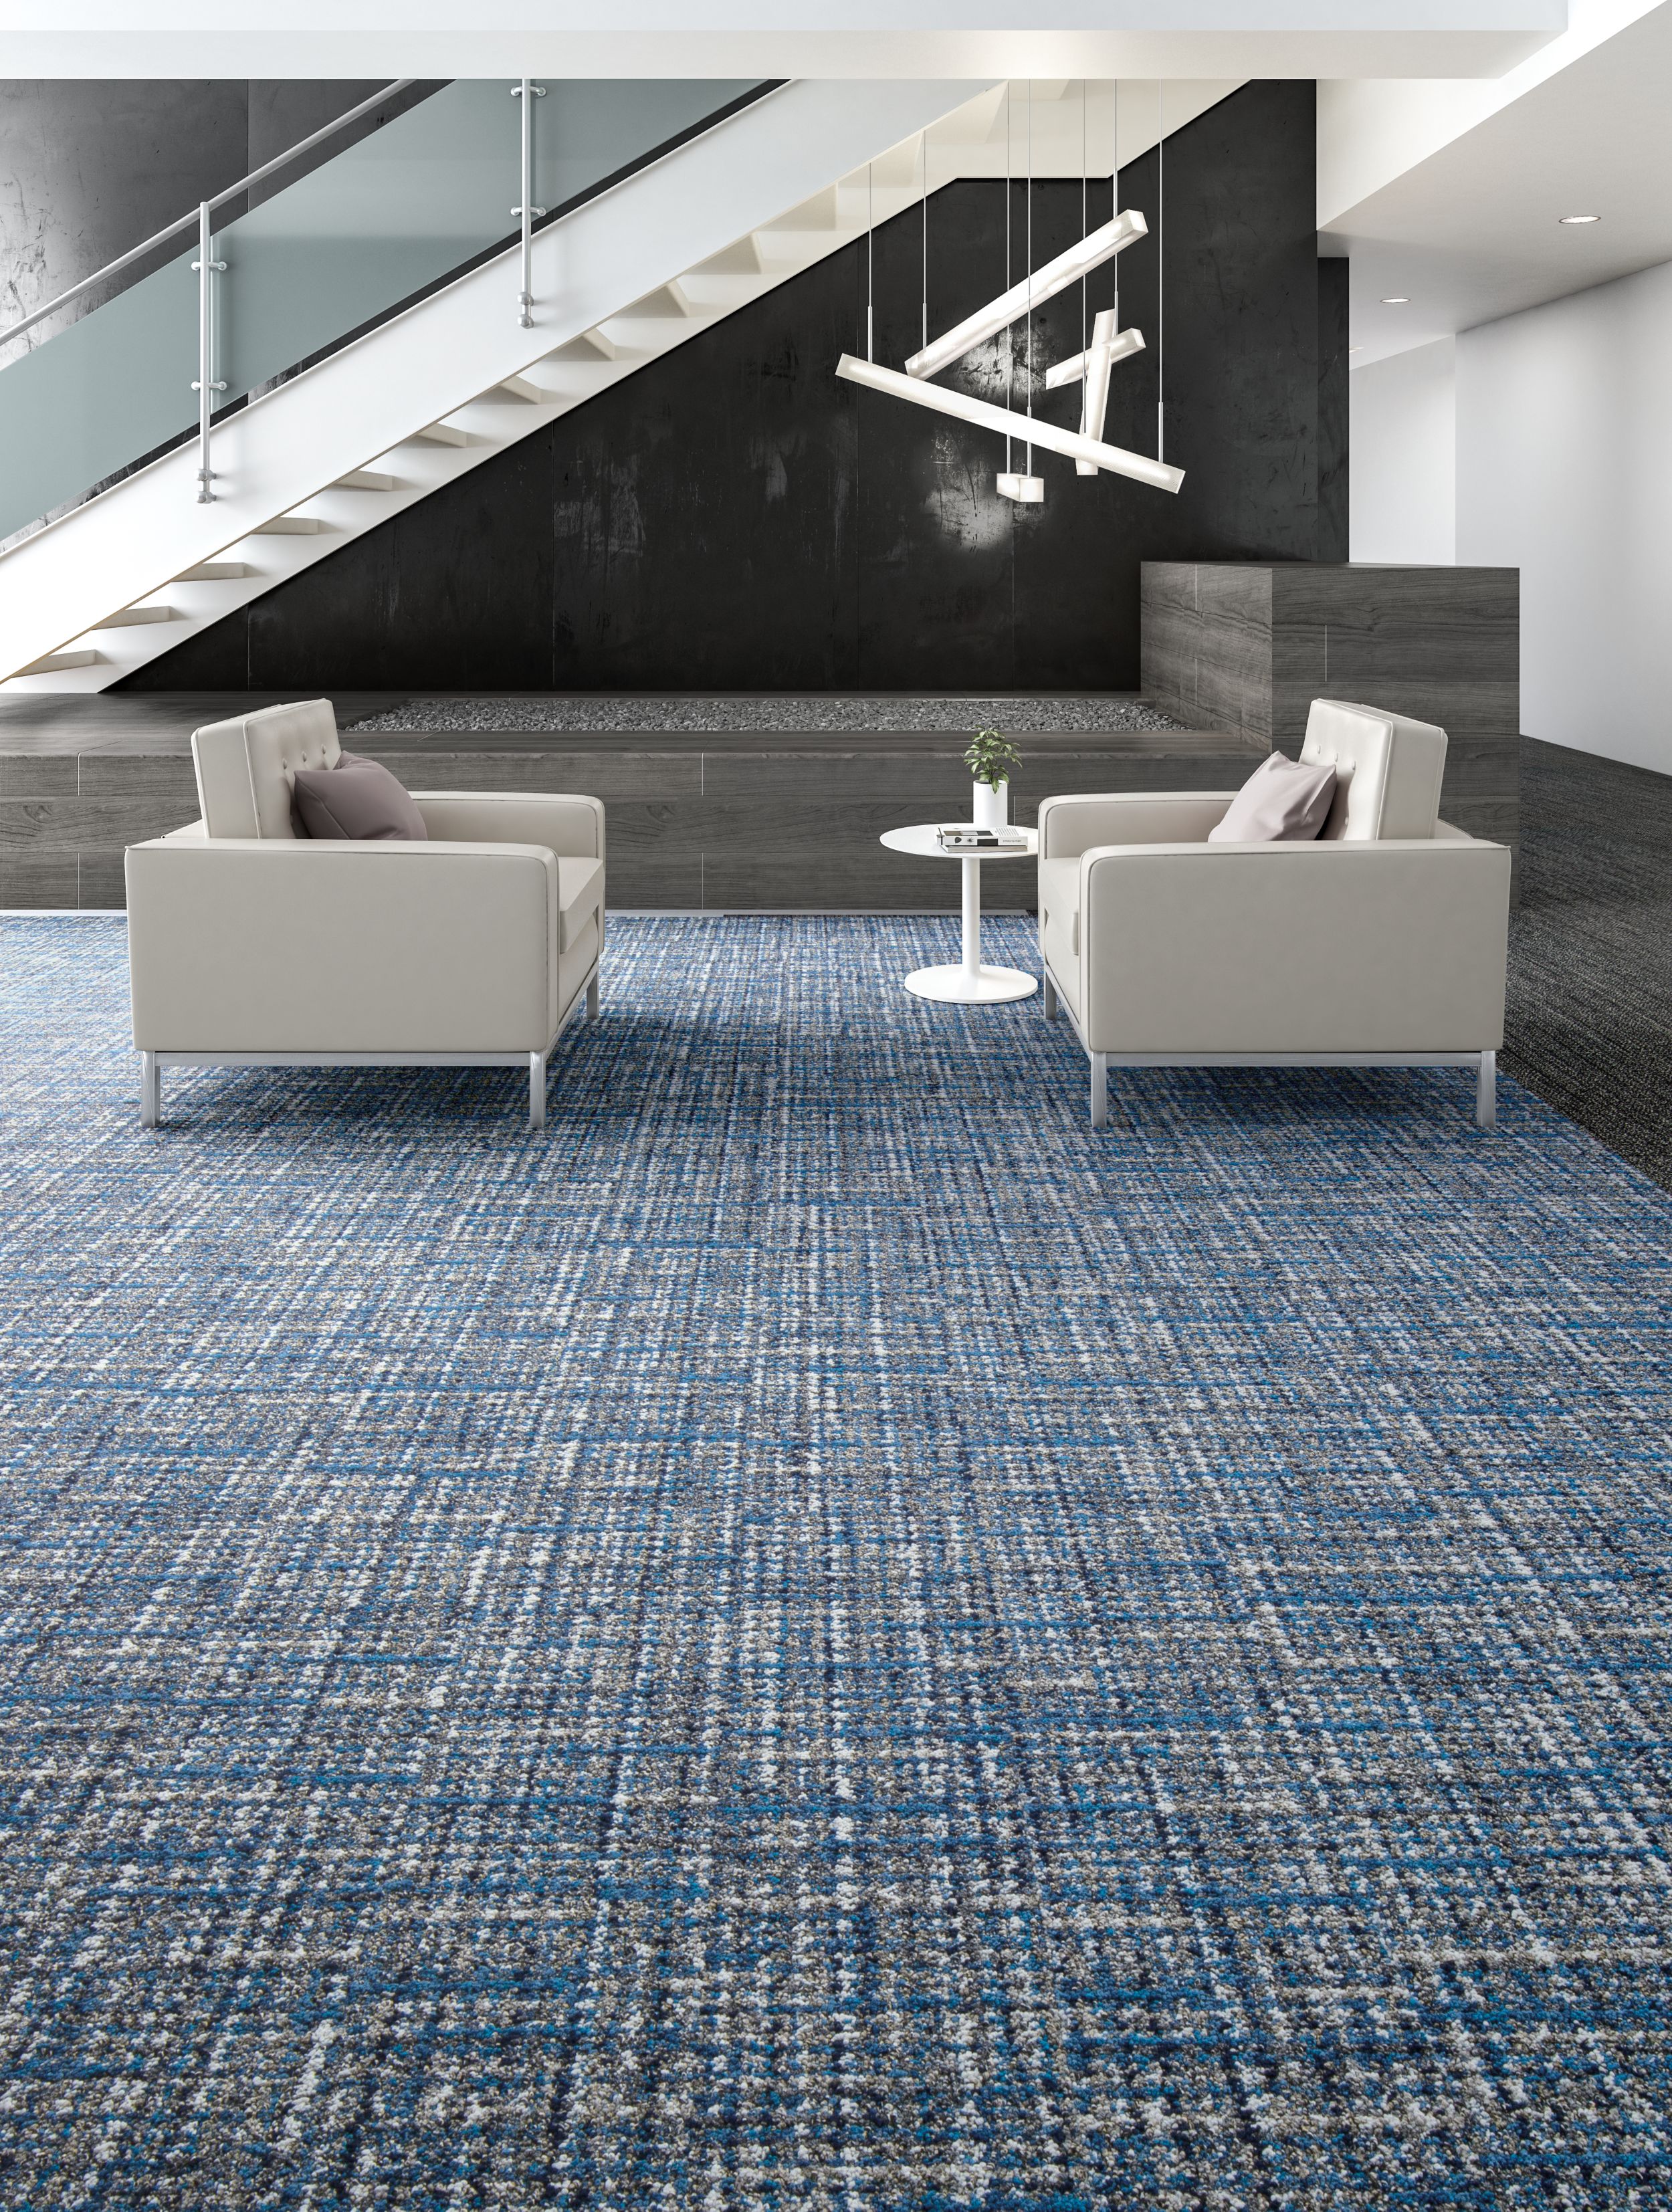 Interface WW895 plank carpet tile in lobby area with couches and side table  afbeeldingnummer 11